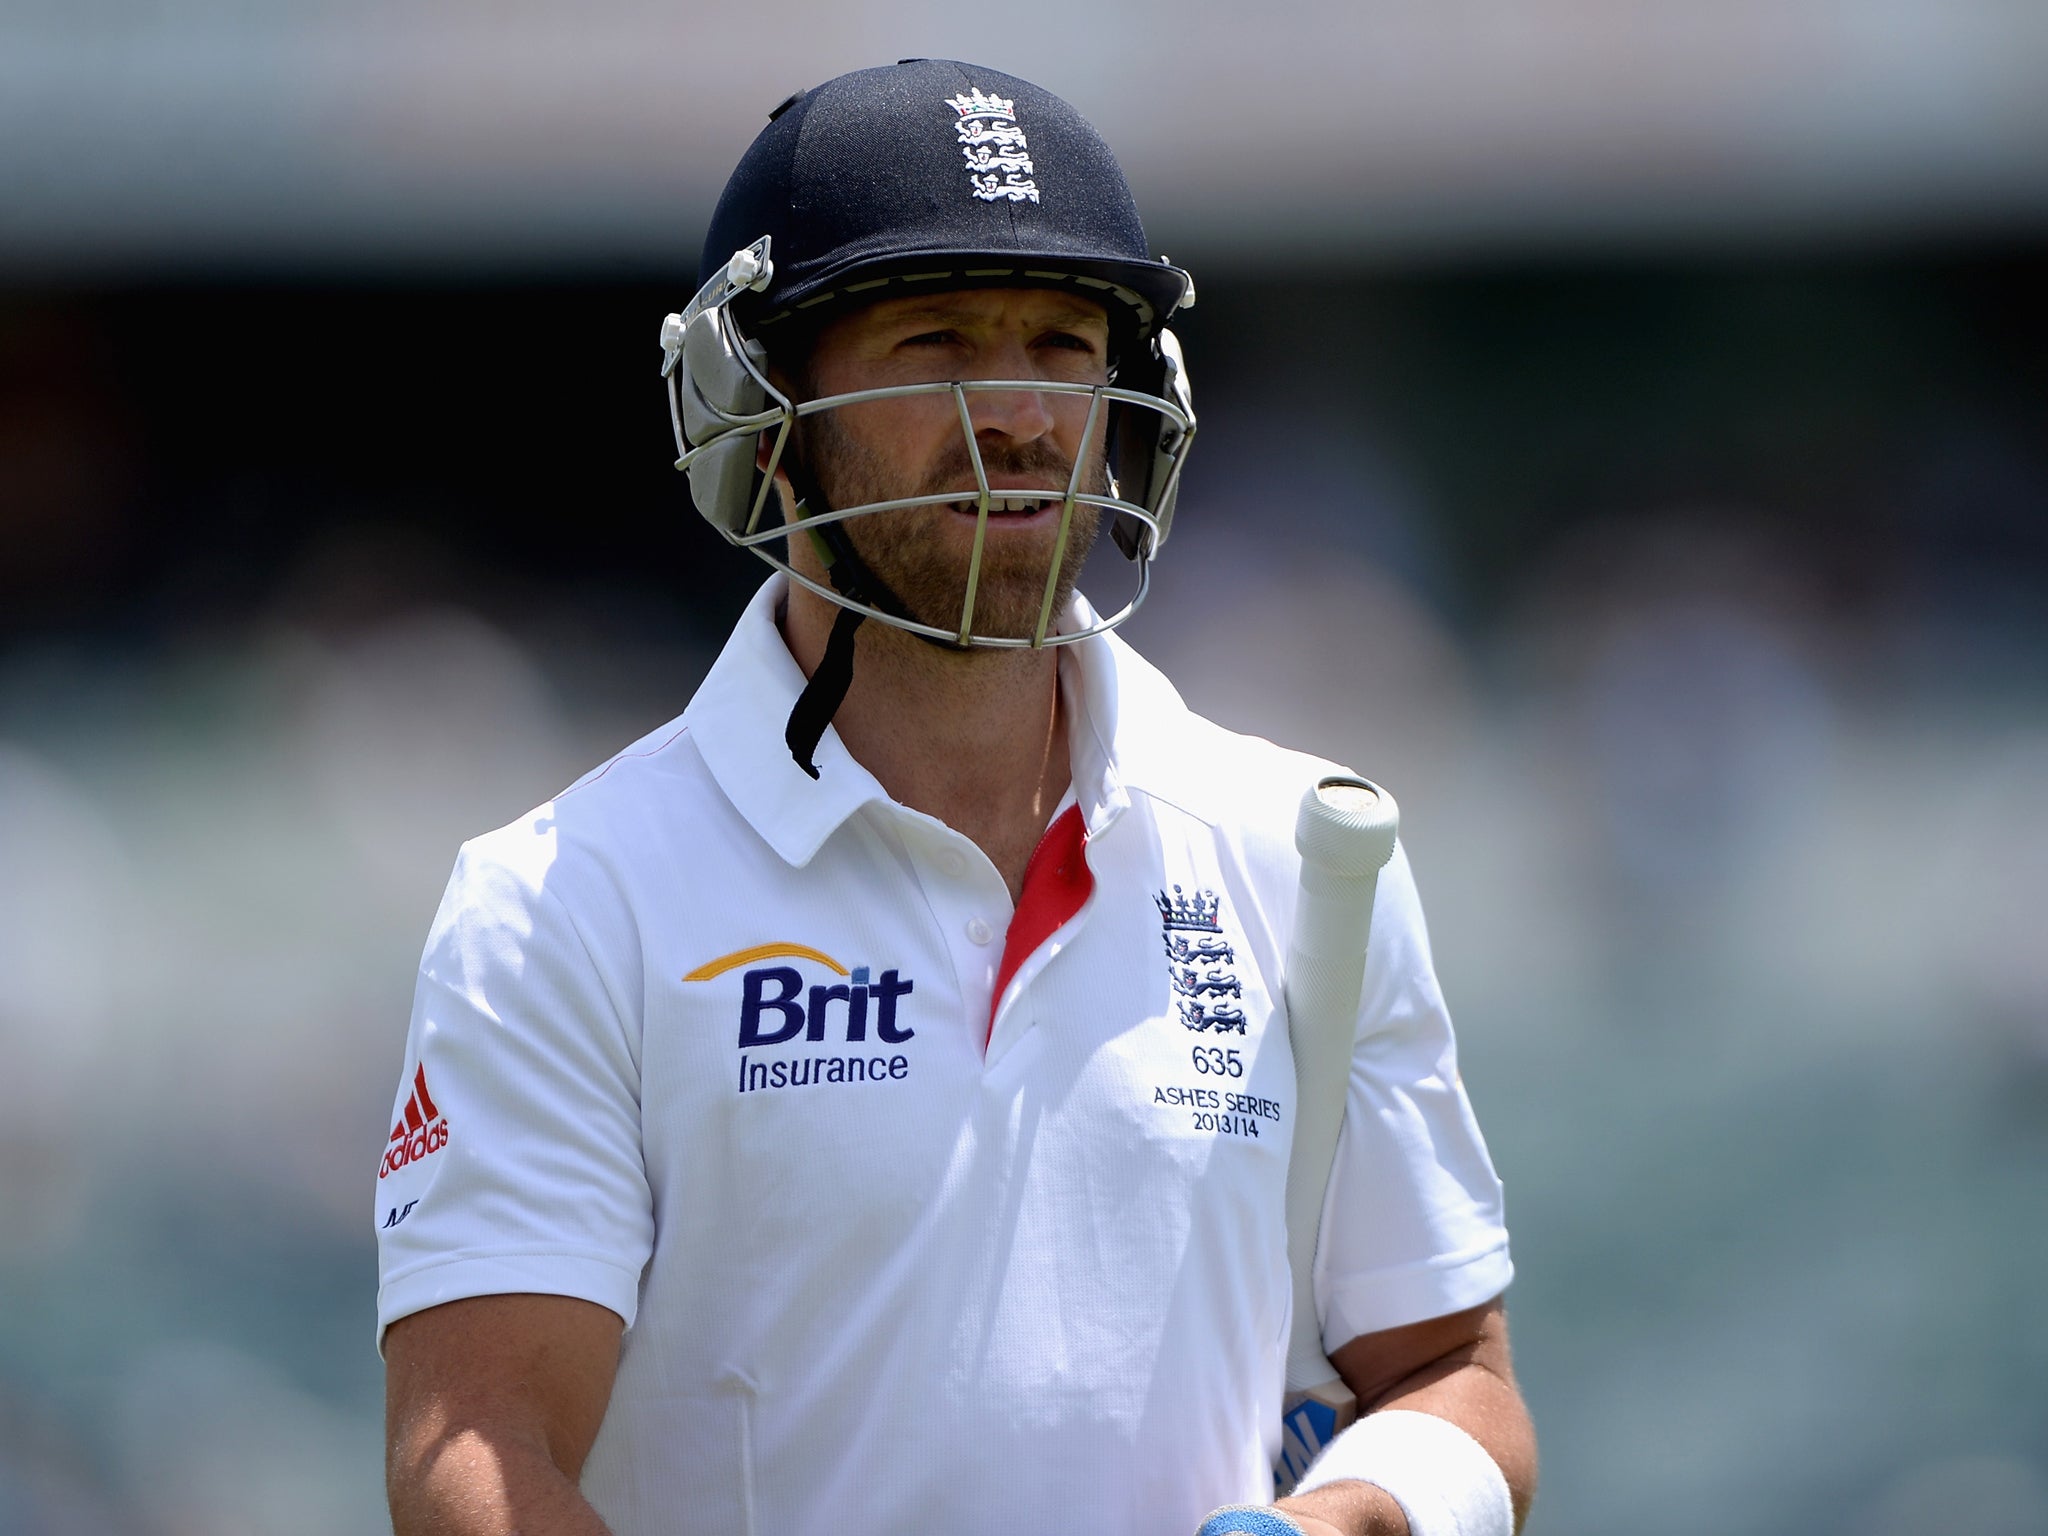 Matt Prior captained England in the absence of Alastair Cook